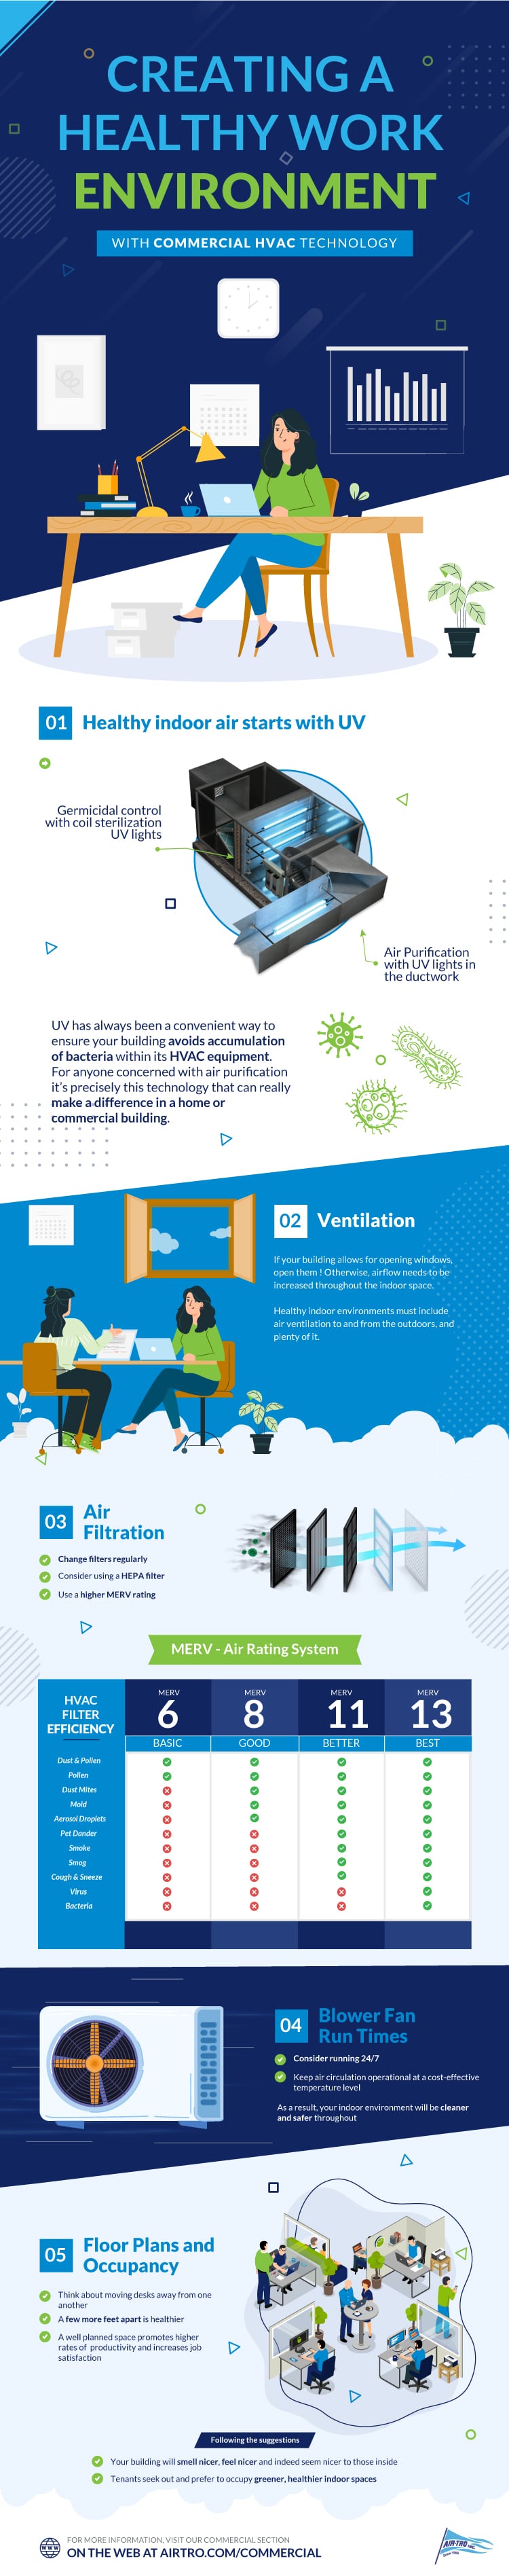 The Top 5 Ways to Improve Your Indoor Air Quality and Create a Healthy Work Environment [INFOGRAPHIC]